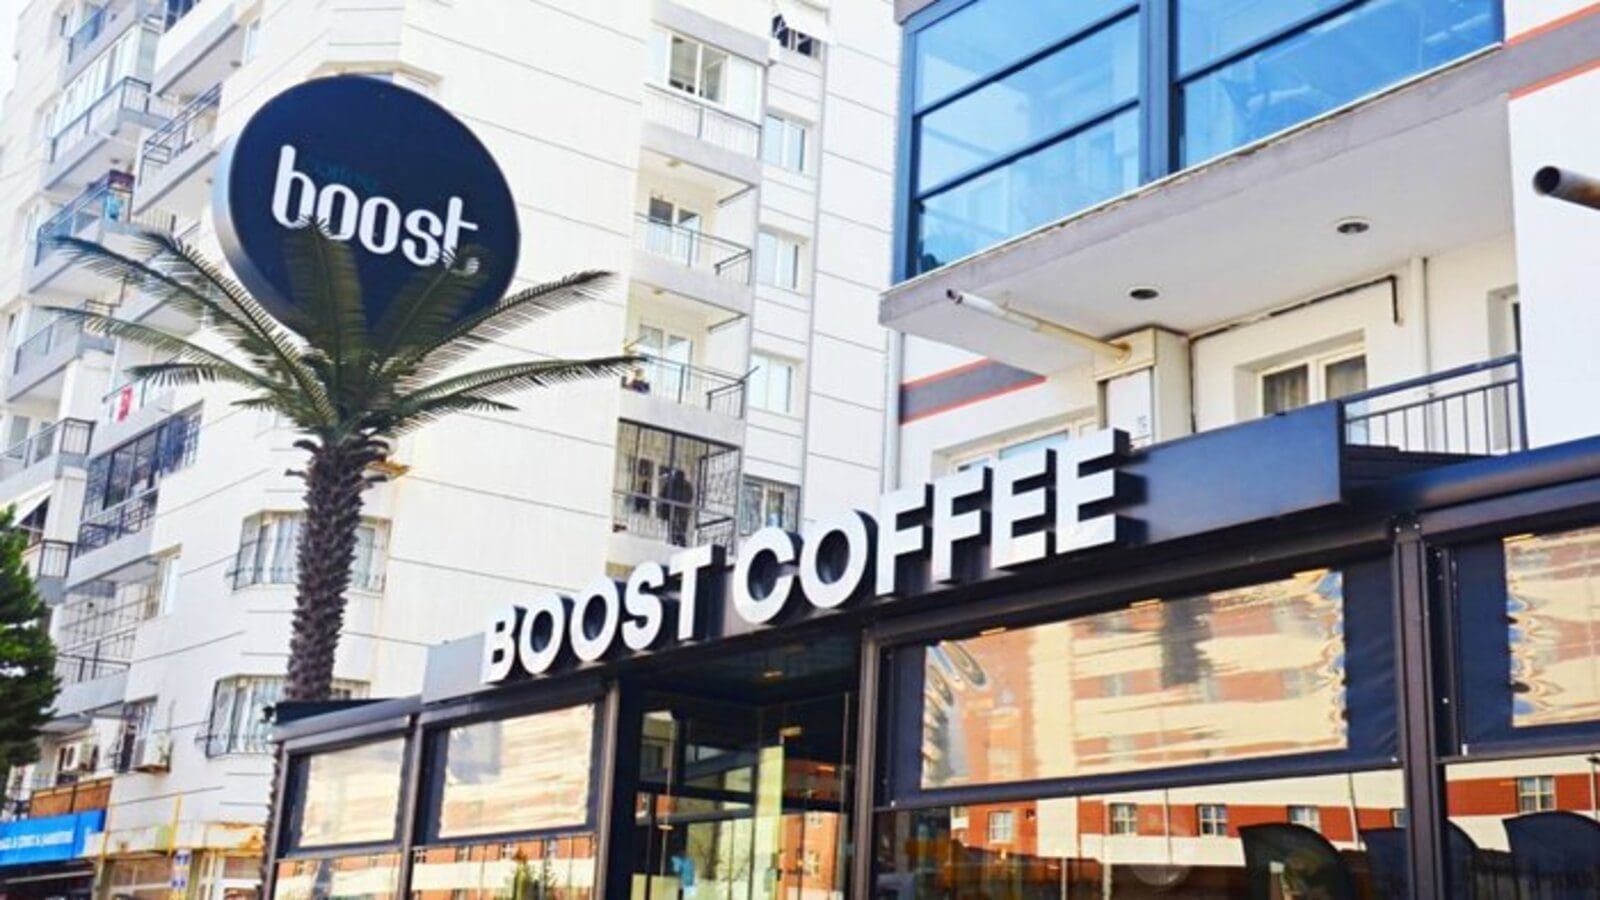 Turkish coffee chain Boost Coffee plans for 8 additional stores across Morocco by 2025